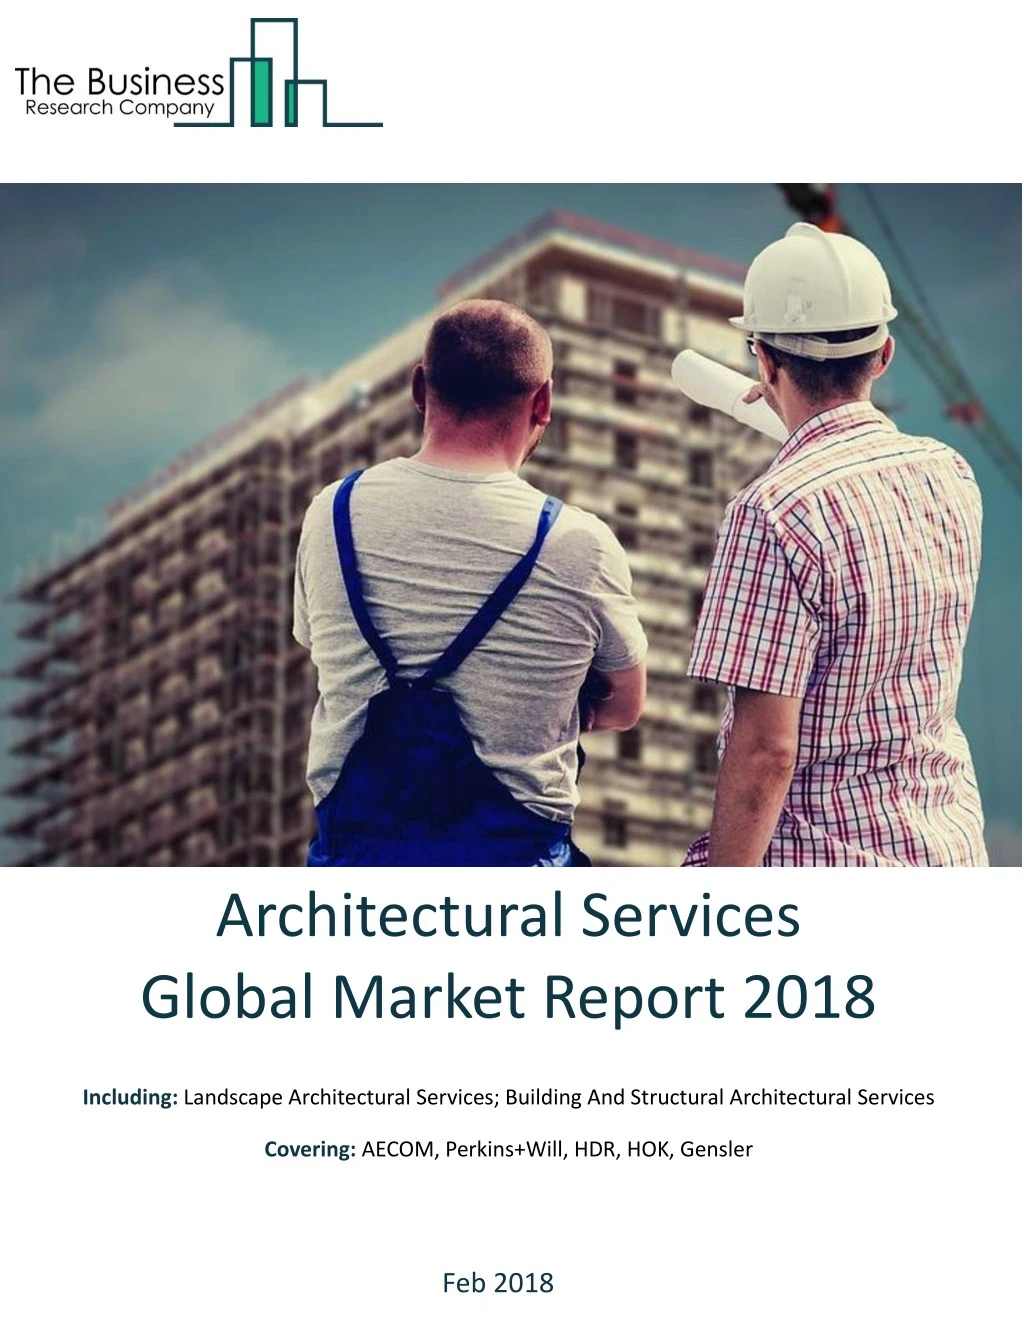 architectural services global market report 2018